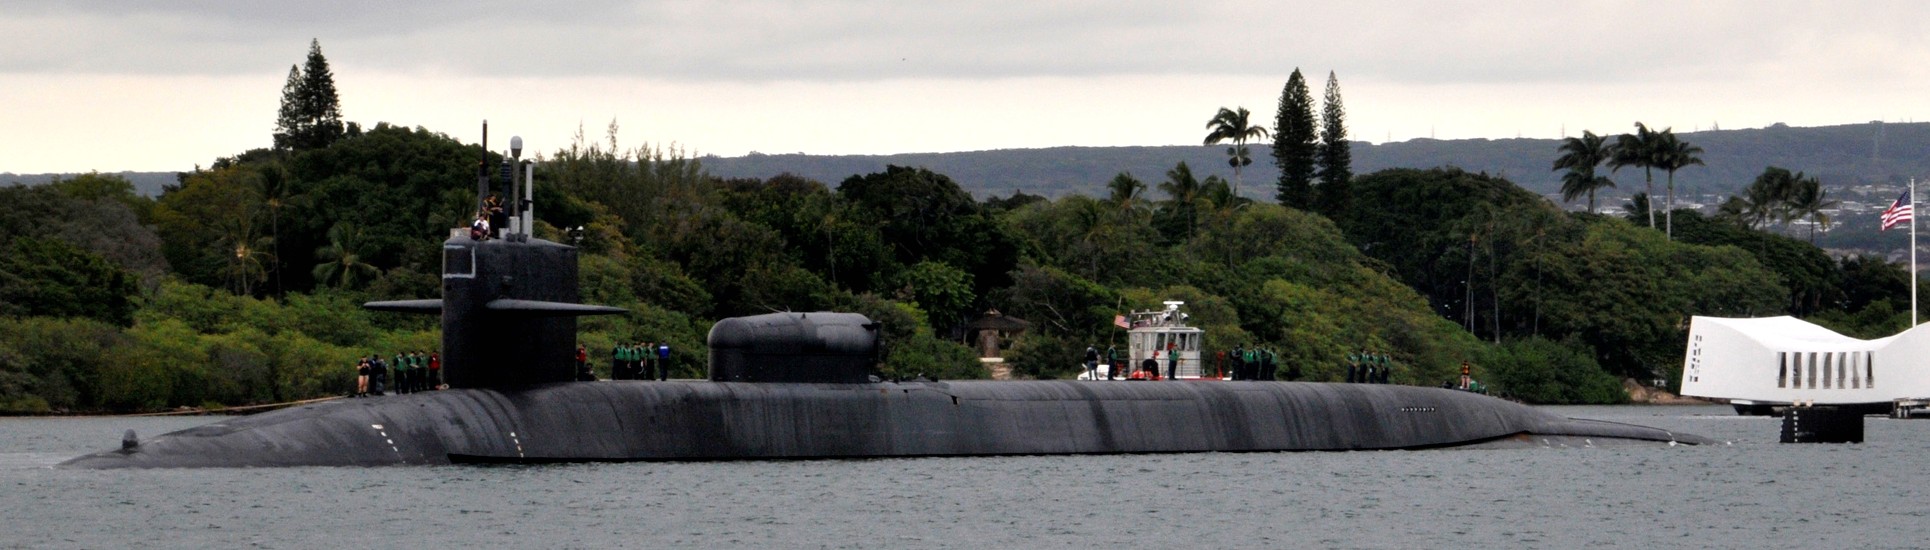 ssgn-726 uss ohio guided missile submarine us navy 2012 27 joint base pearl harbor hickam hawaii